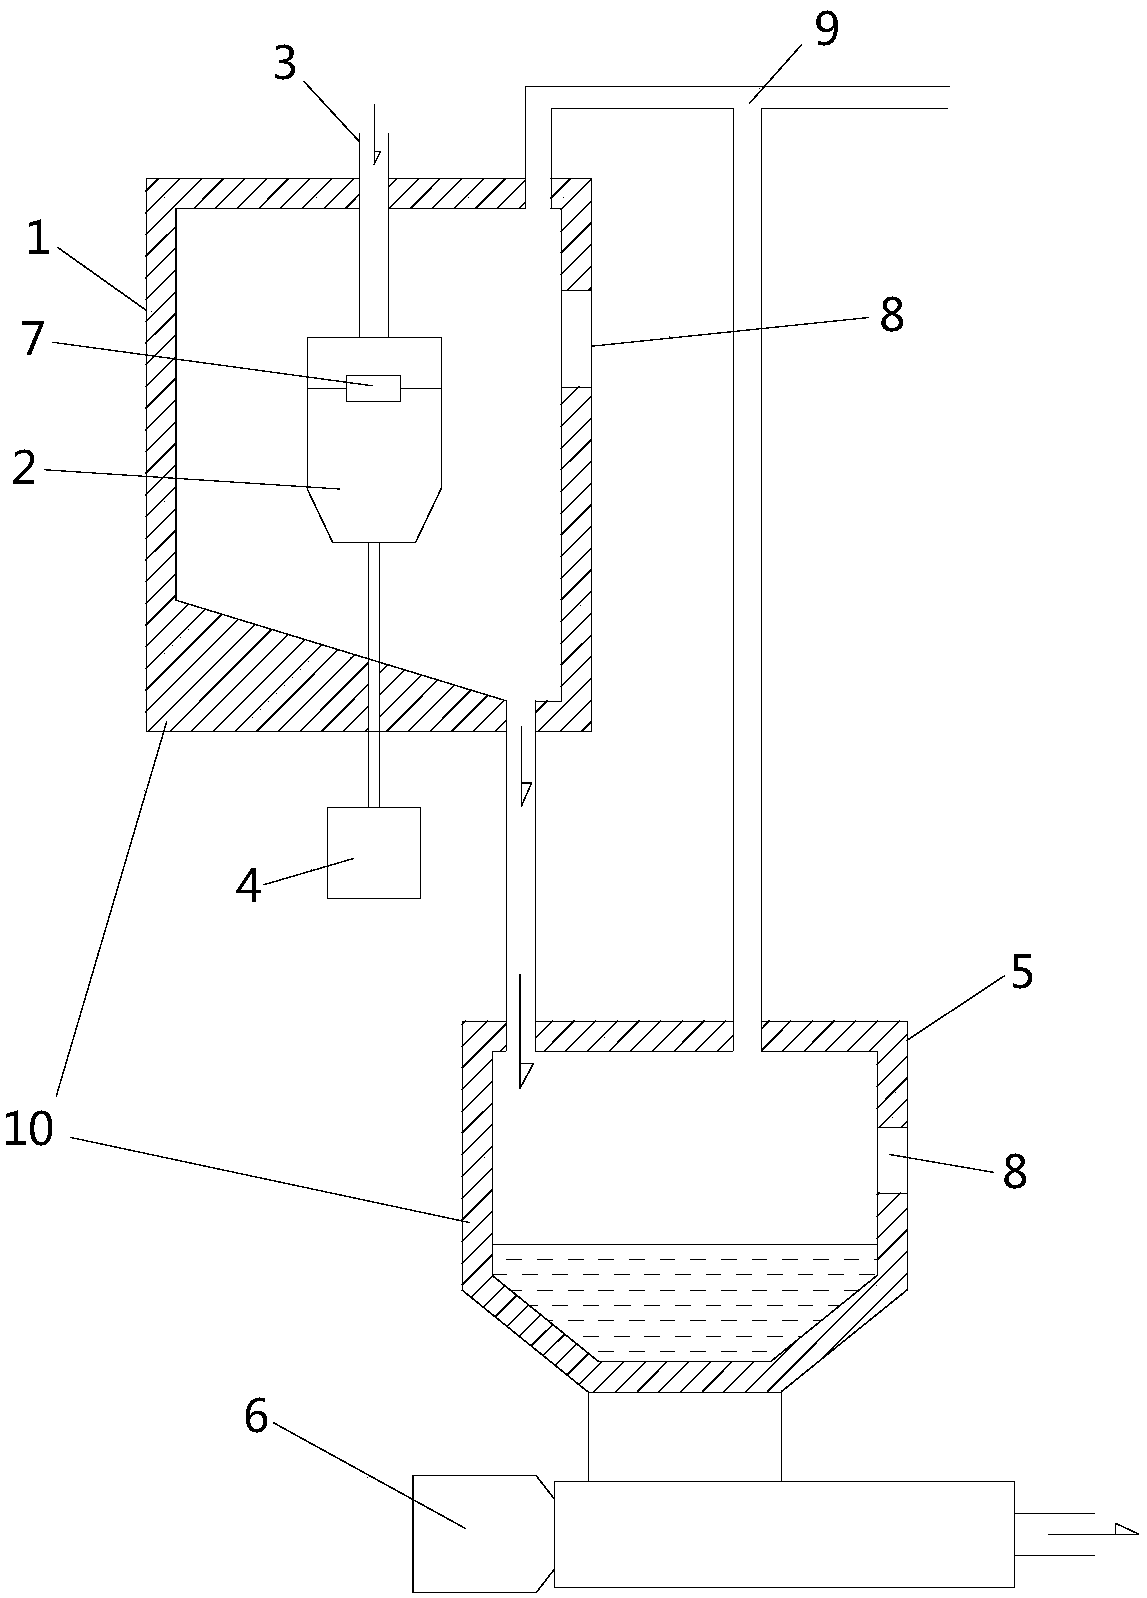 Defoaming device for cellulose solution, and defoaming method of defoaming device